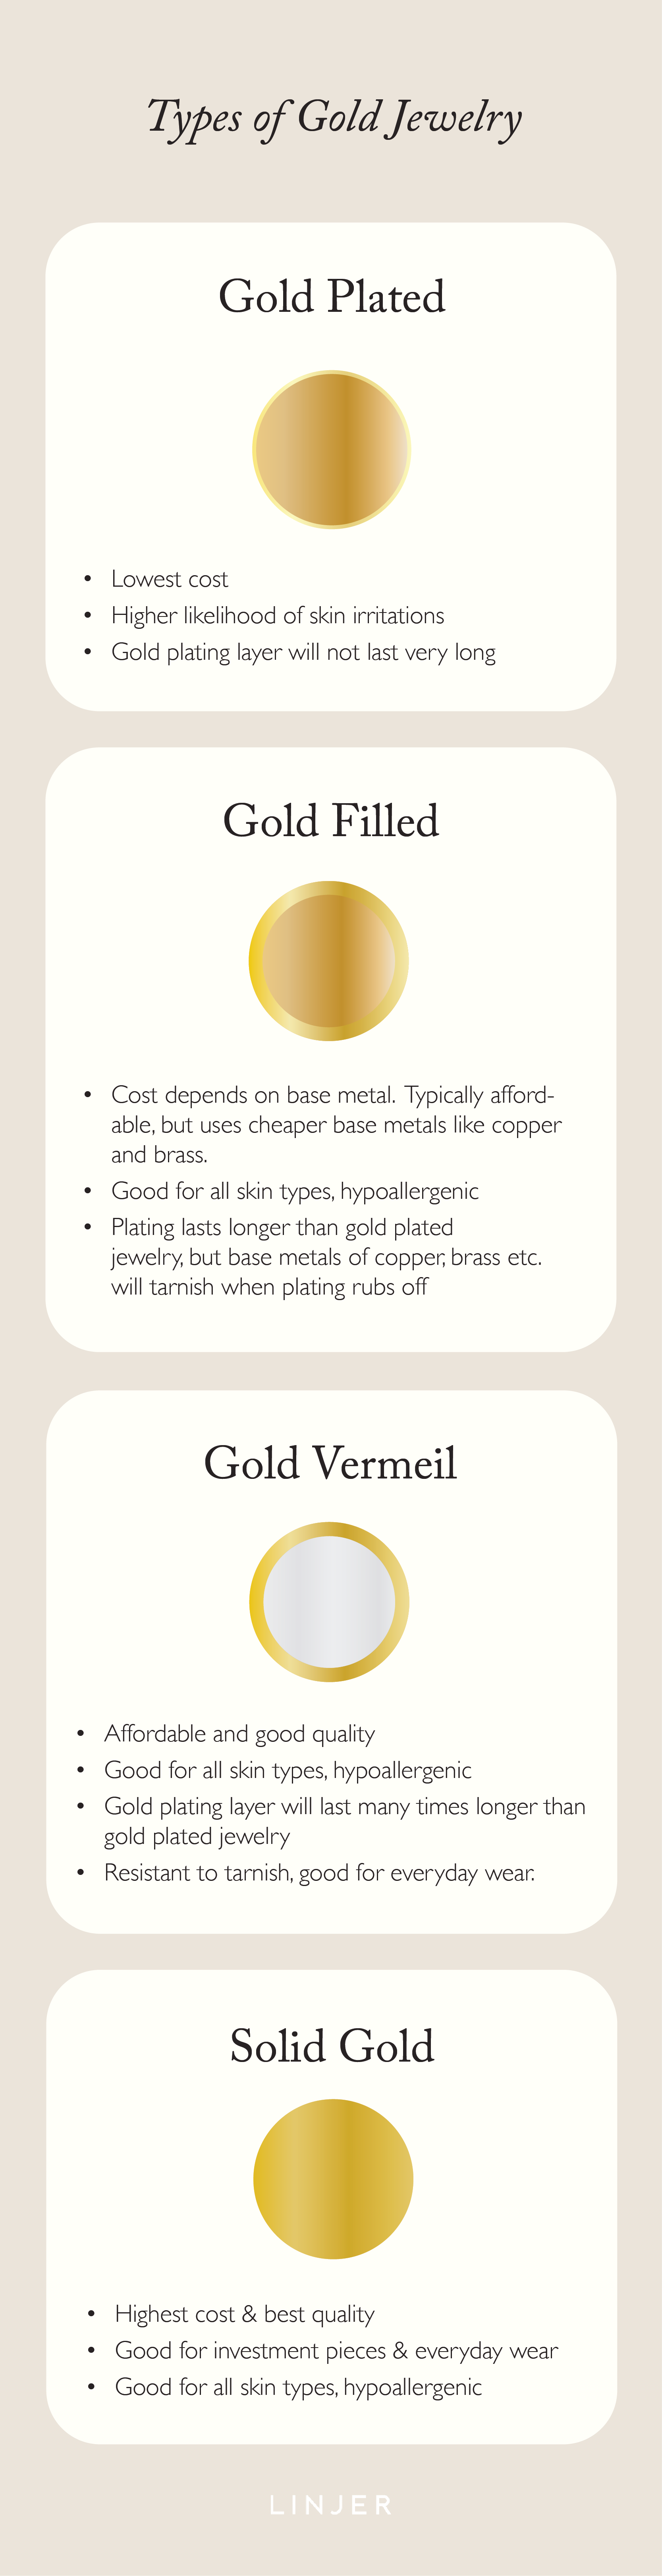 Does Gold Vermeil Wear off? Discover the Truth About its Longevity!